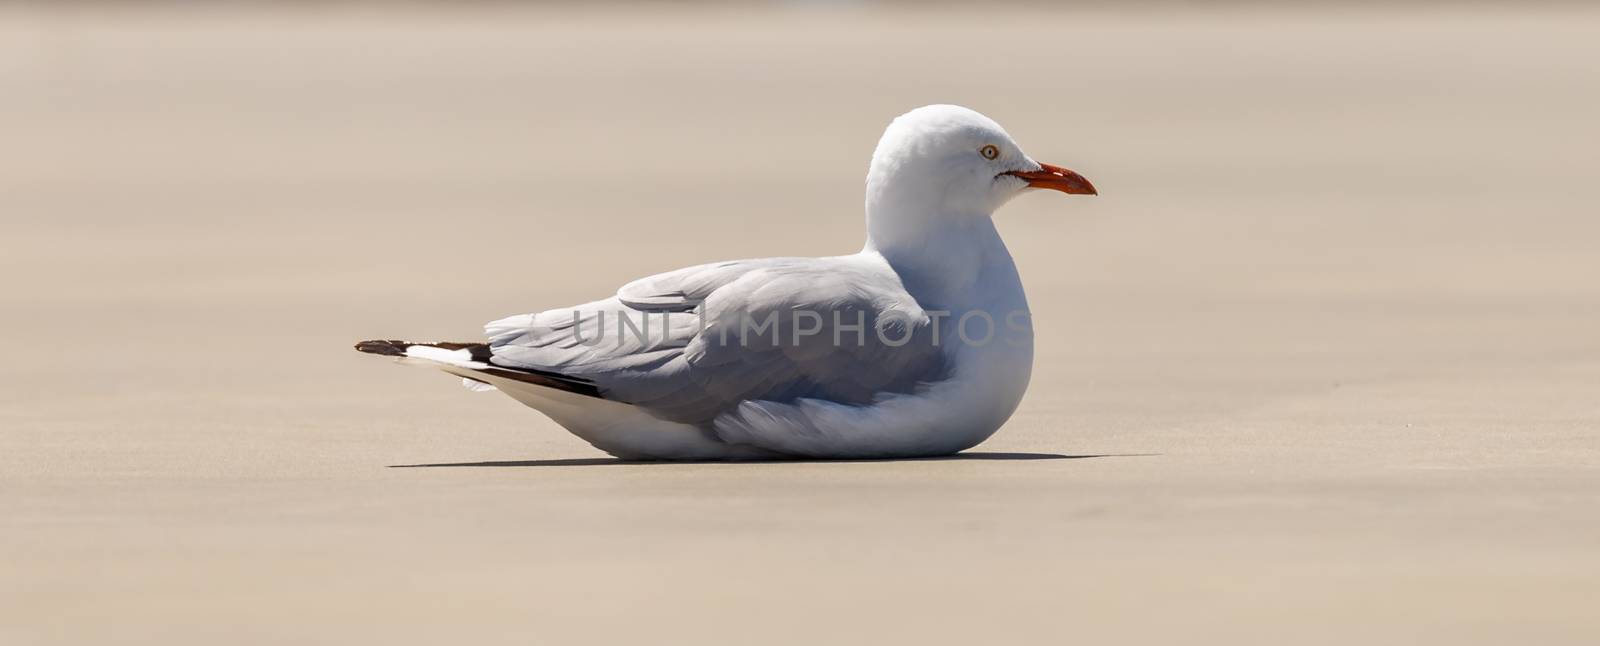 Seagull sitting on concrete. Blurred background by DamantisZ